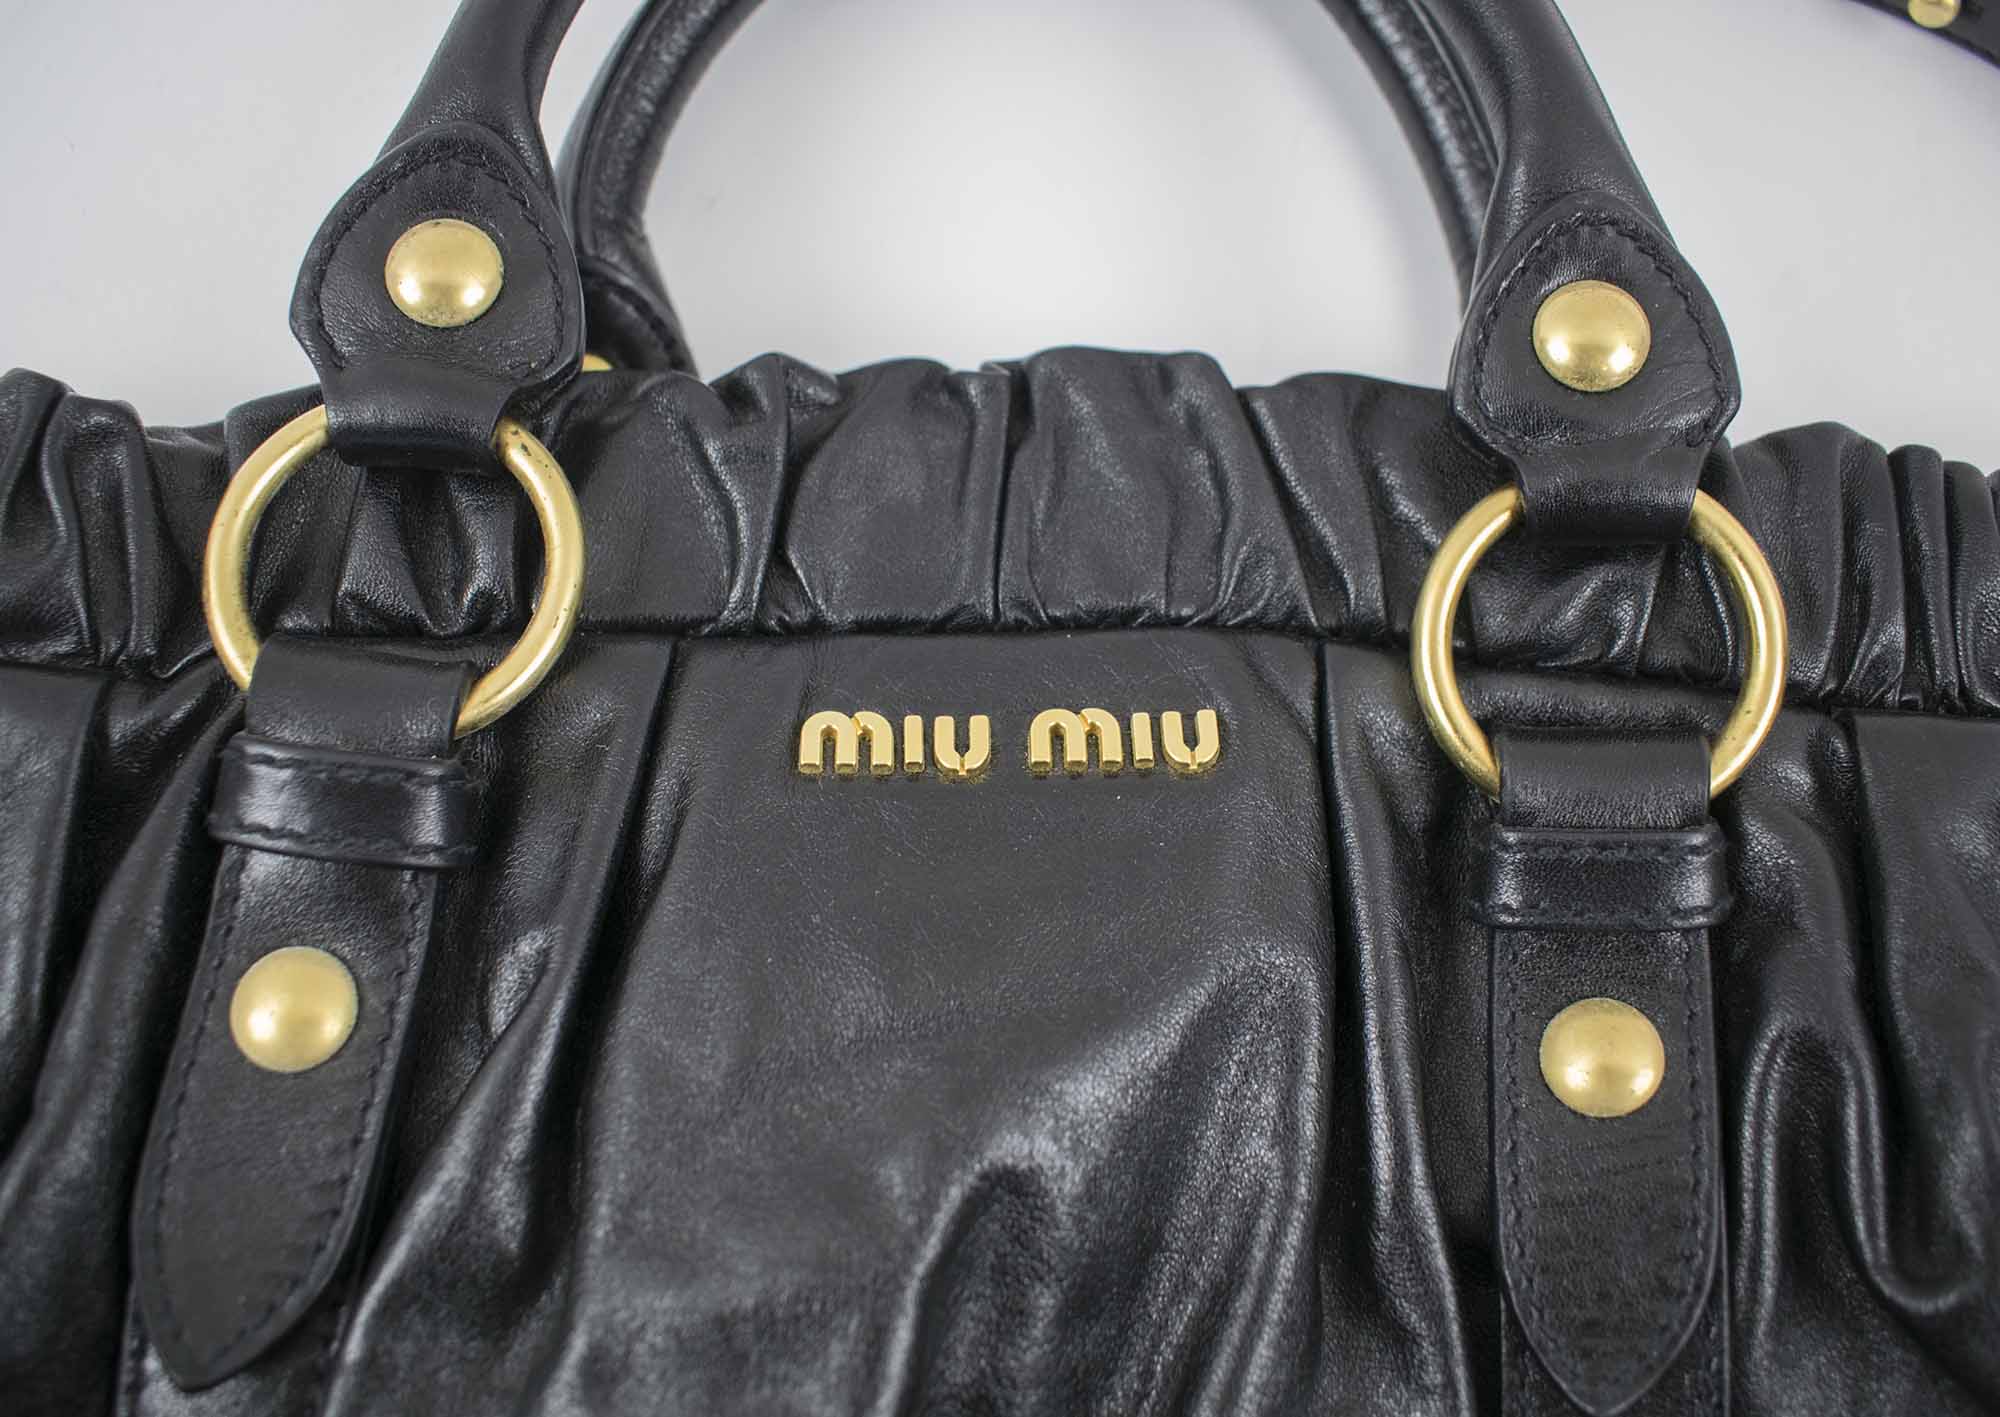 MIU MIU VITELLO LUX GATHERED TOTE BAG, black leather with detachable  shoulder strap, brass tone hardware, pleated leather closure, two top  handles with dust bag, 40cm x 34cm H x 15cm.